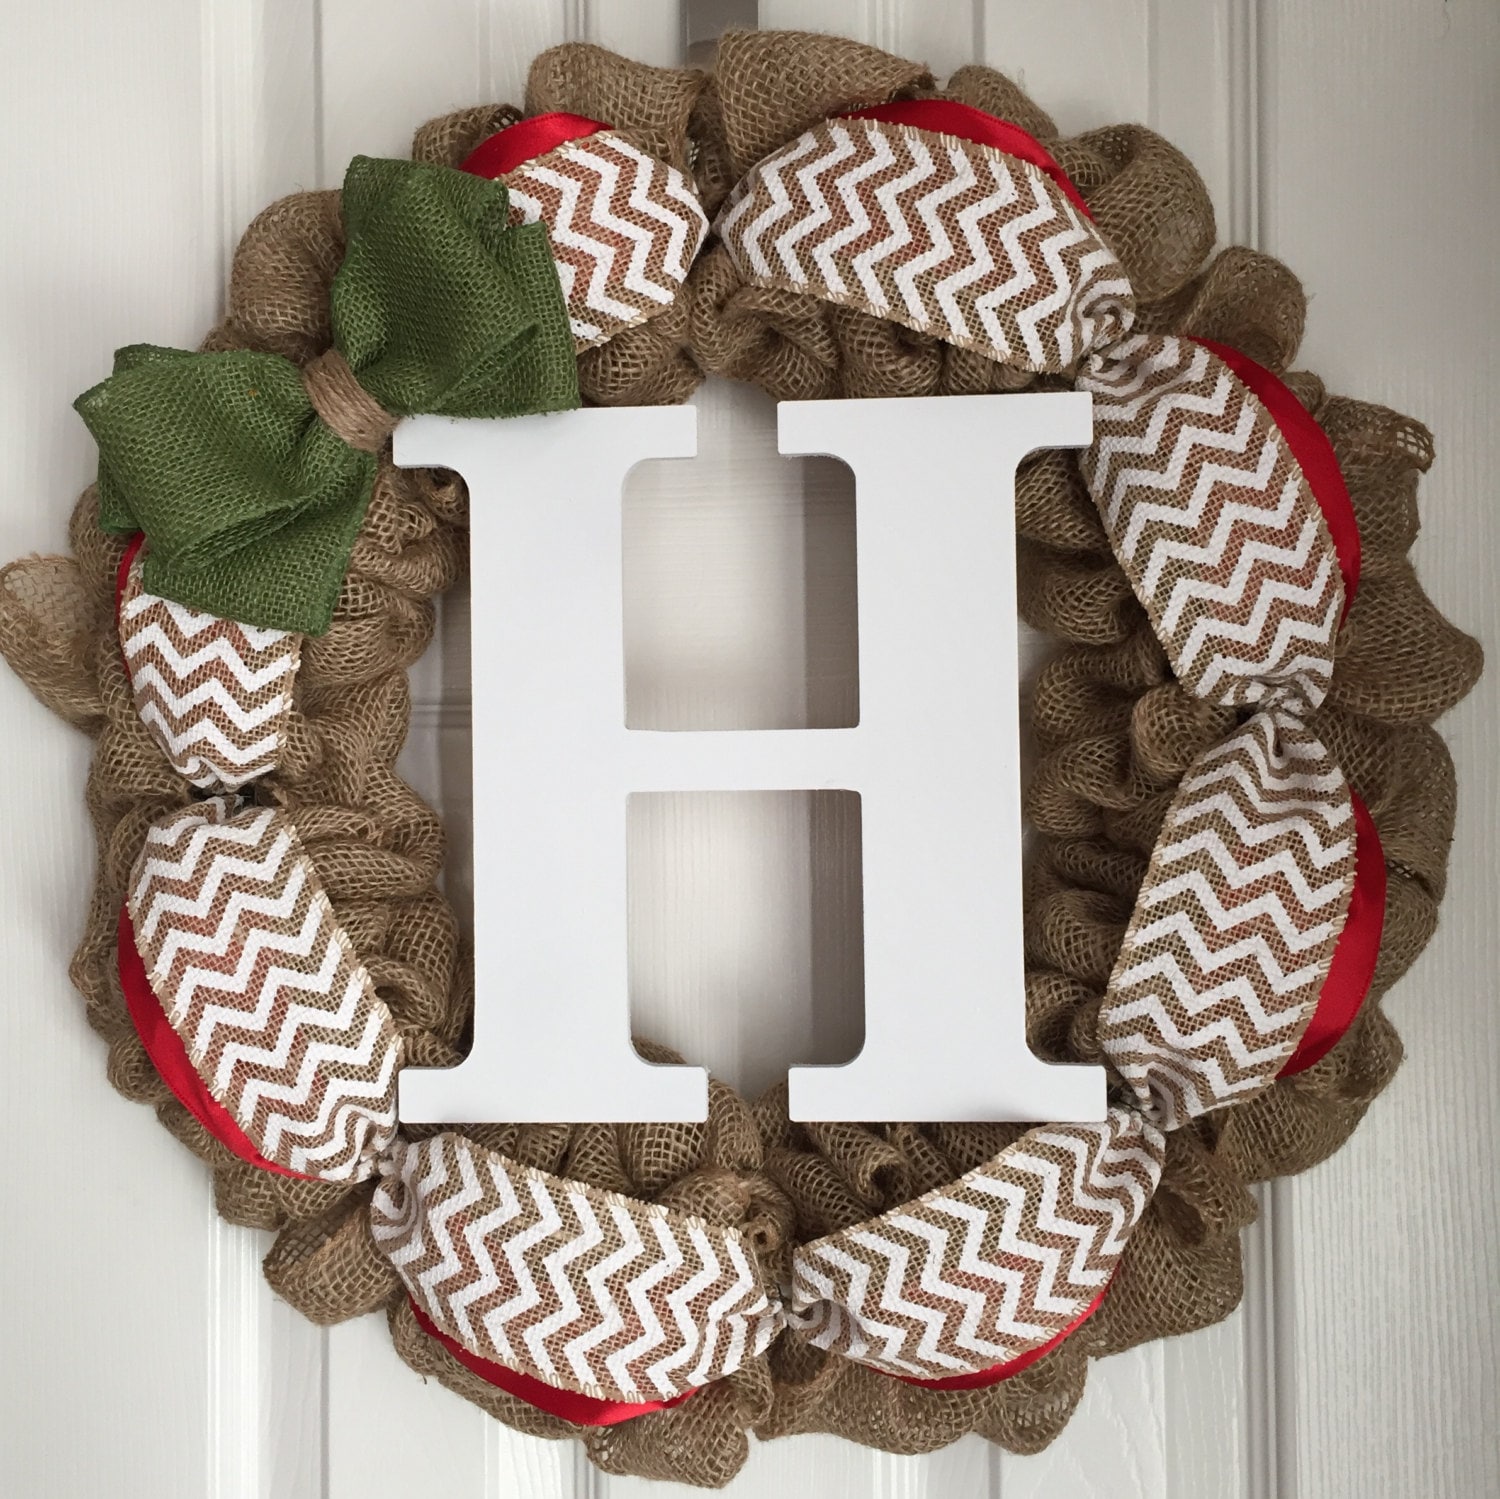 Monogram Holiday Wreath for Front Door - Holiday Burlap Wreath - Red and Green Burlap Wreath - Holiday Door Hanger - Monogram Door Hanger